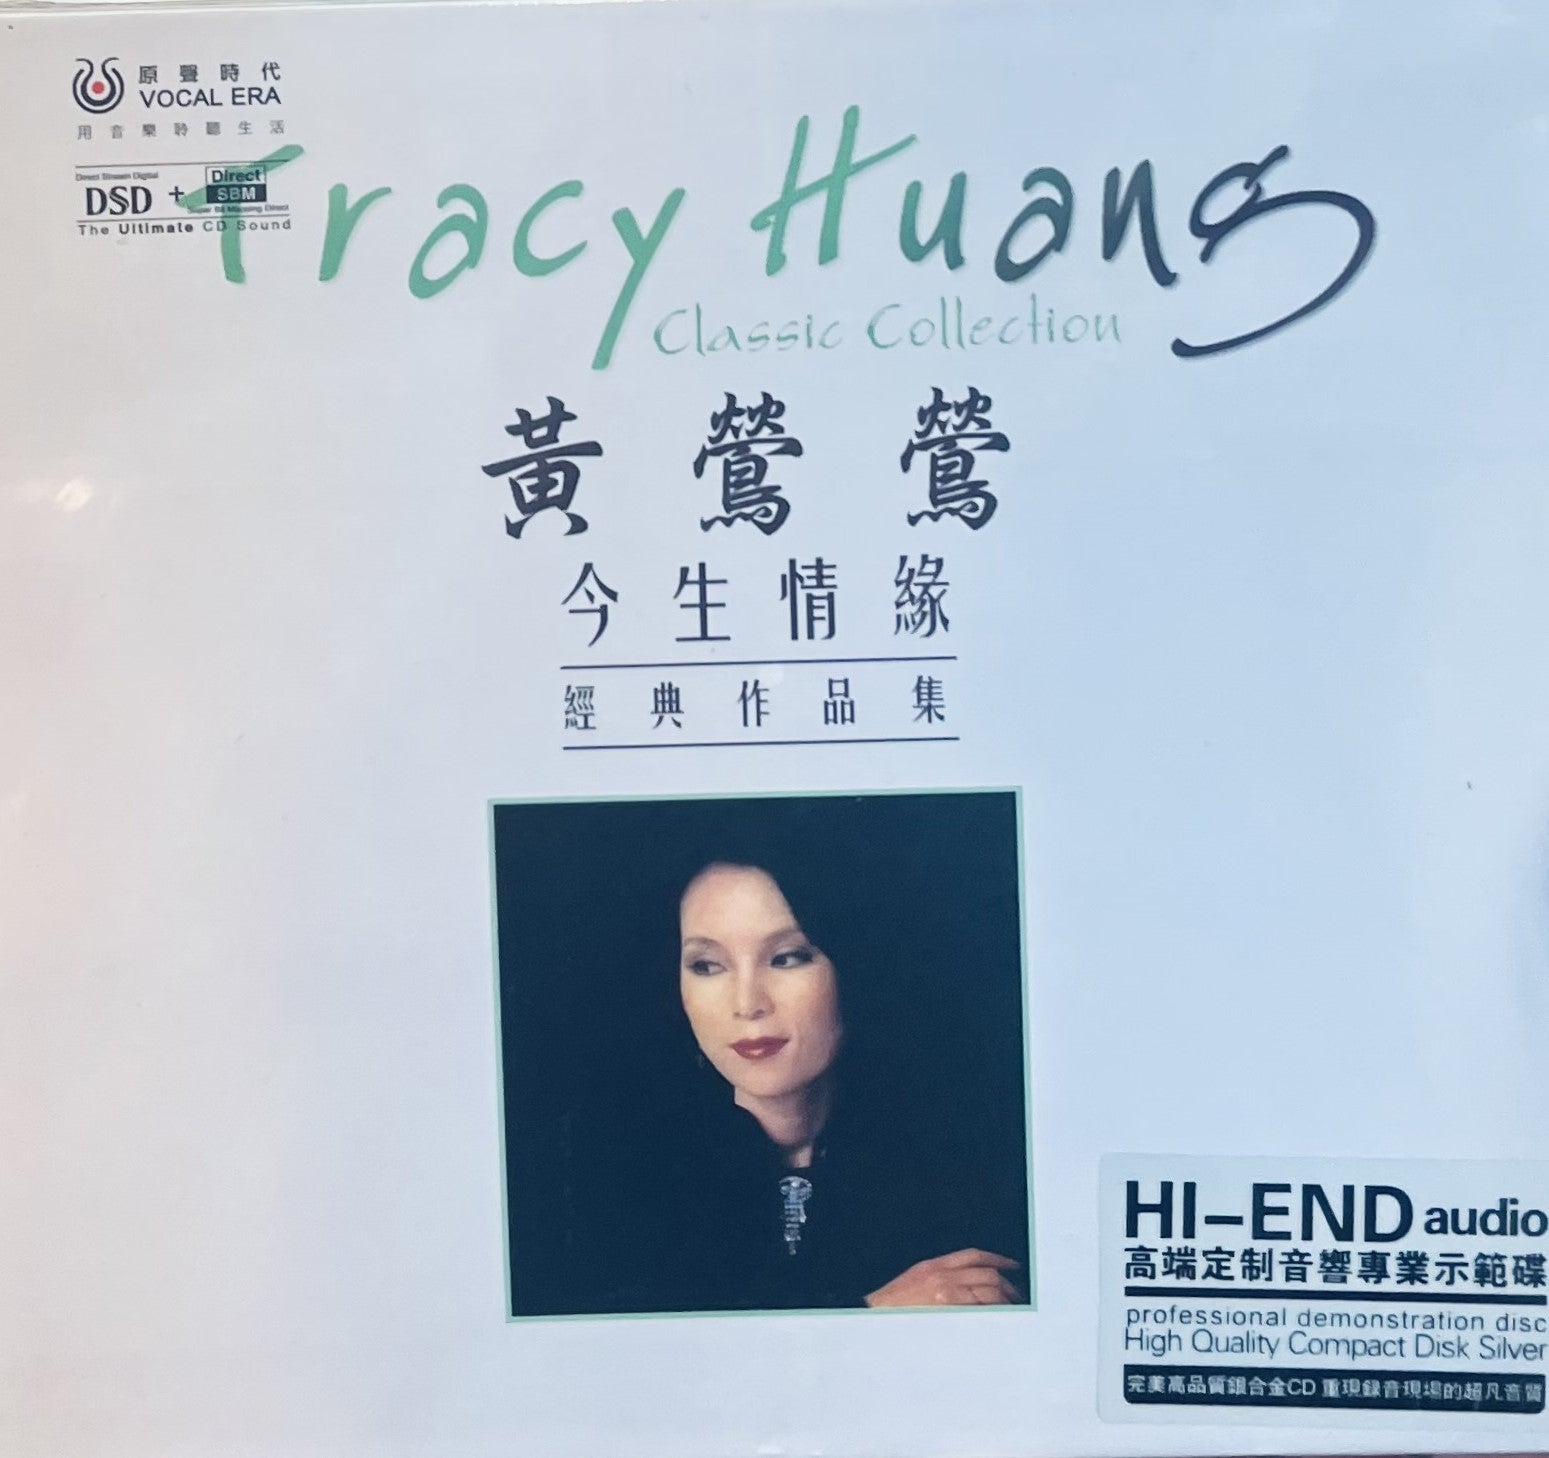 TRACY HUANG - 黃鶯鶯  CLASSIC COLLECTION 今生情緣  (CD)